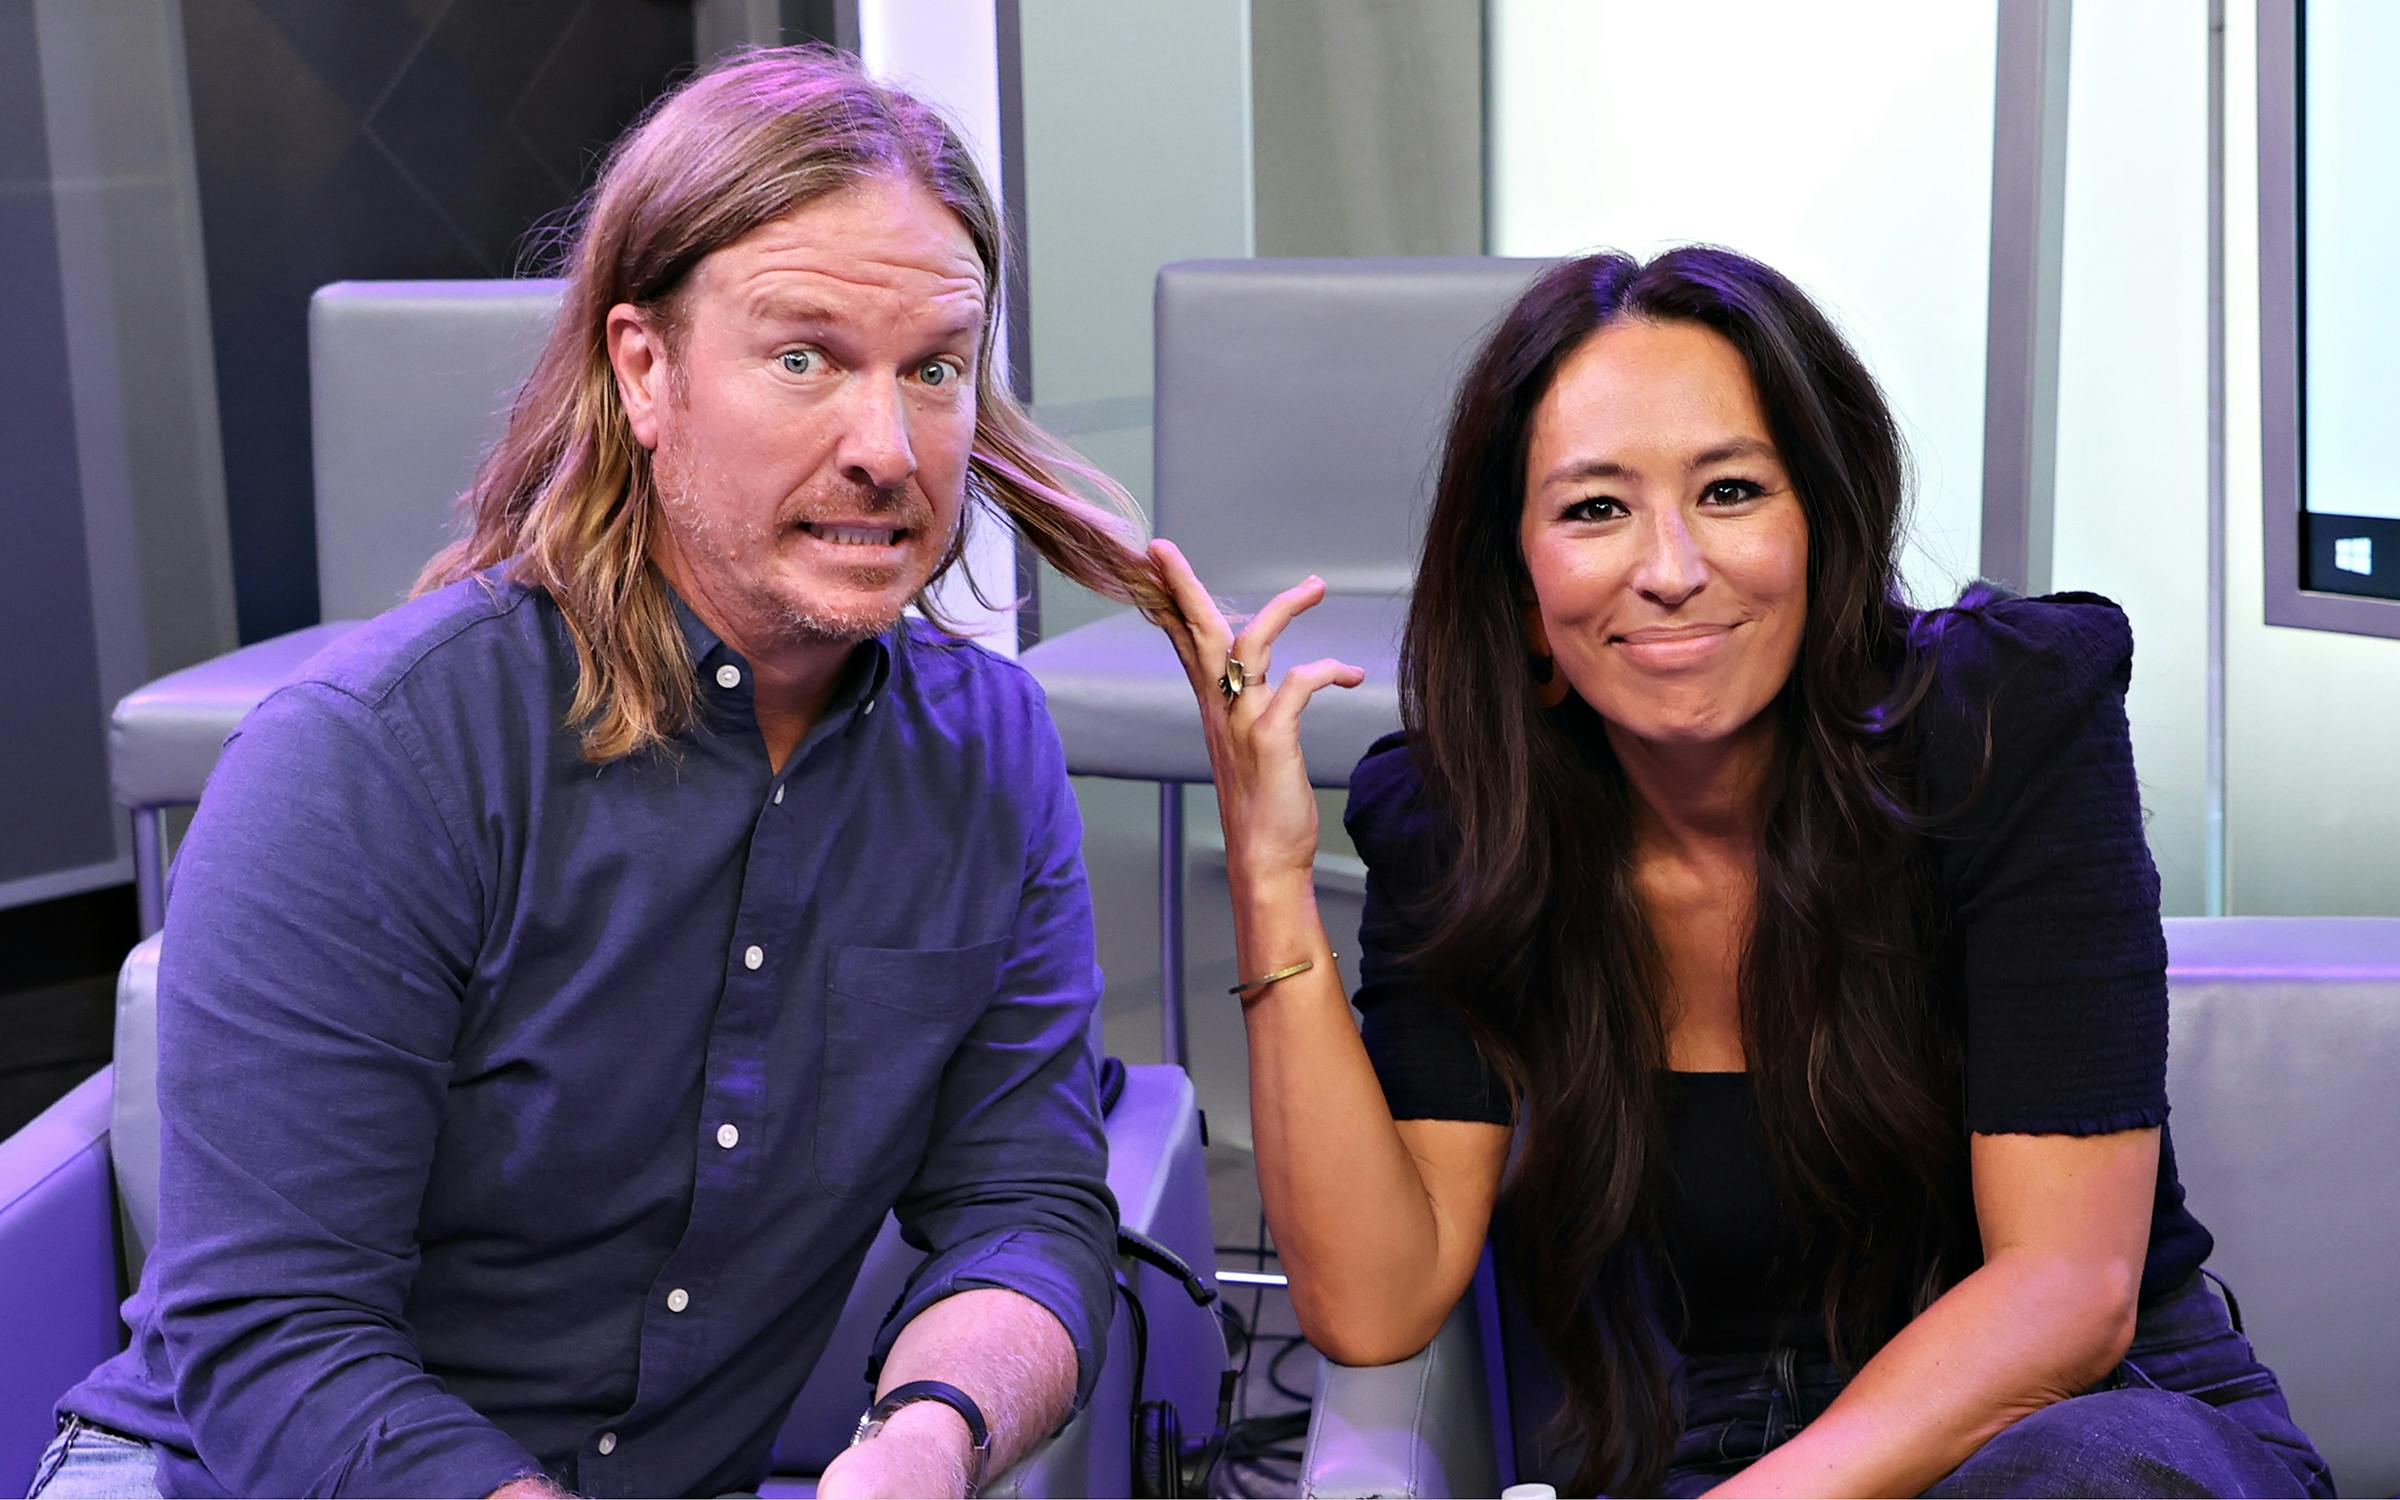 https://img.texasmonthly.com/2022/01/chip-and-joanna-gaines.jpg?auto=compress&crop=faces&fit=fit&fm=pjpg&ixlib=php-3.3.1&q=45